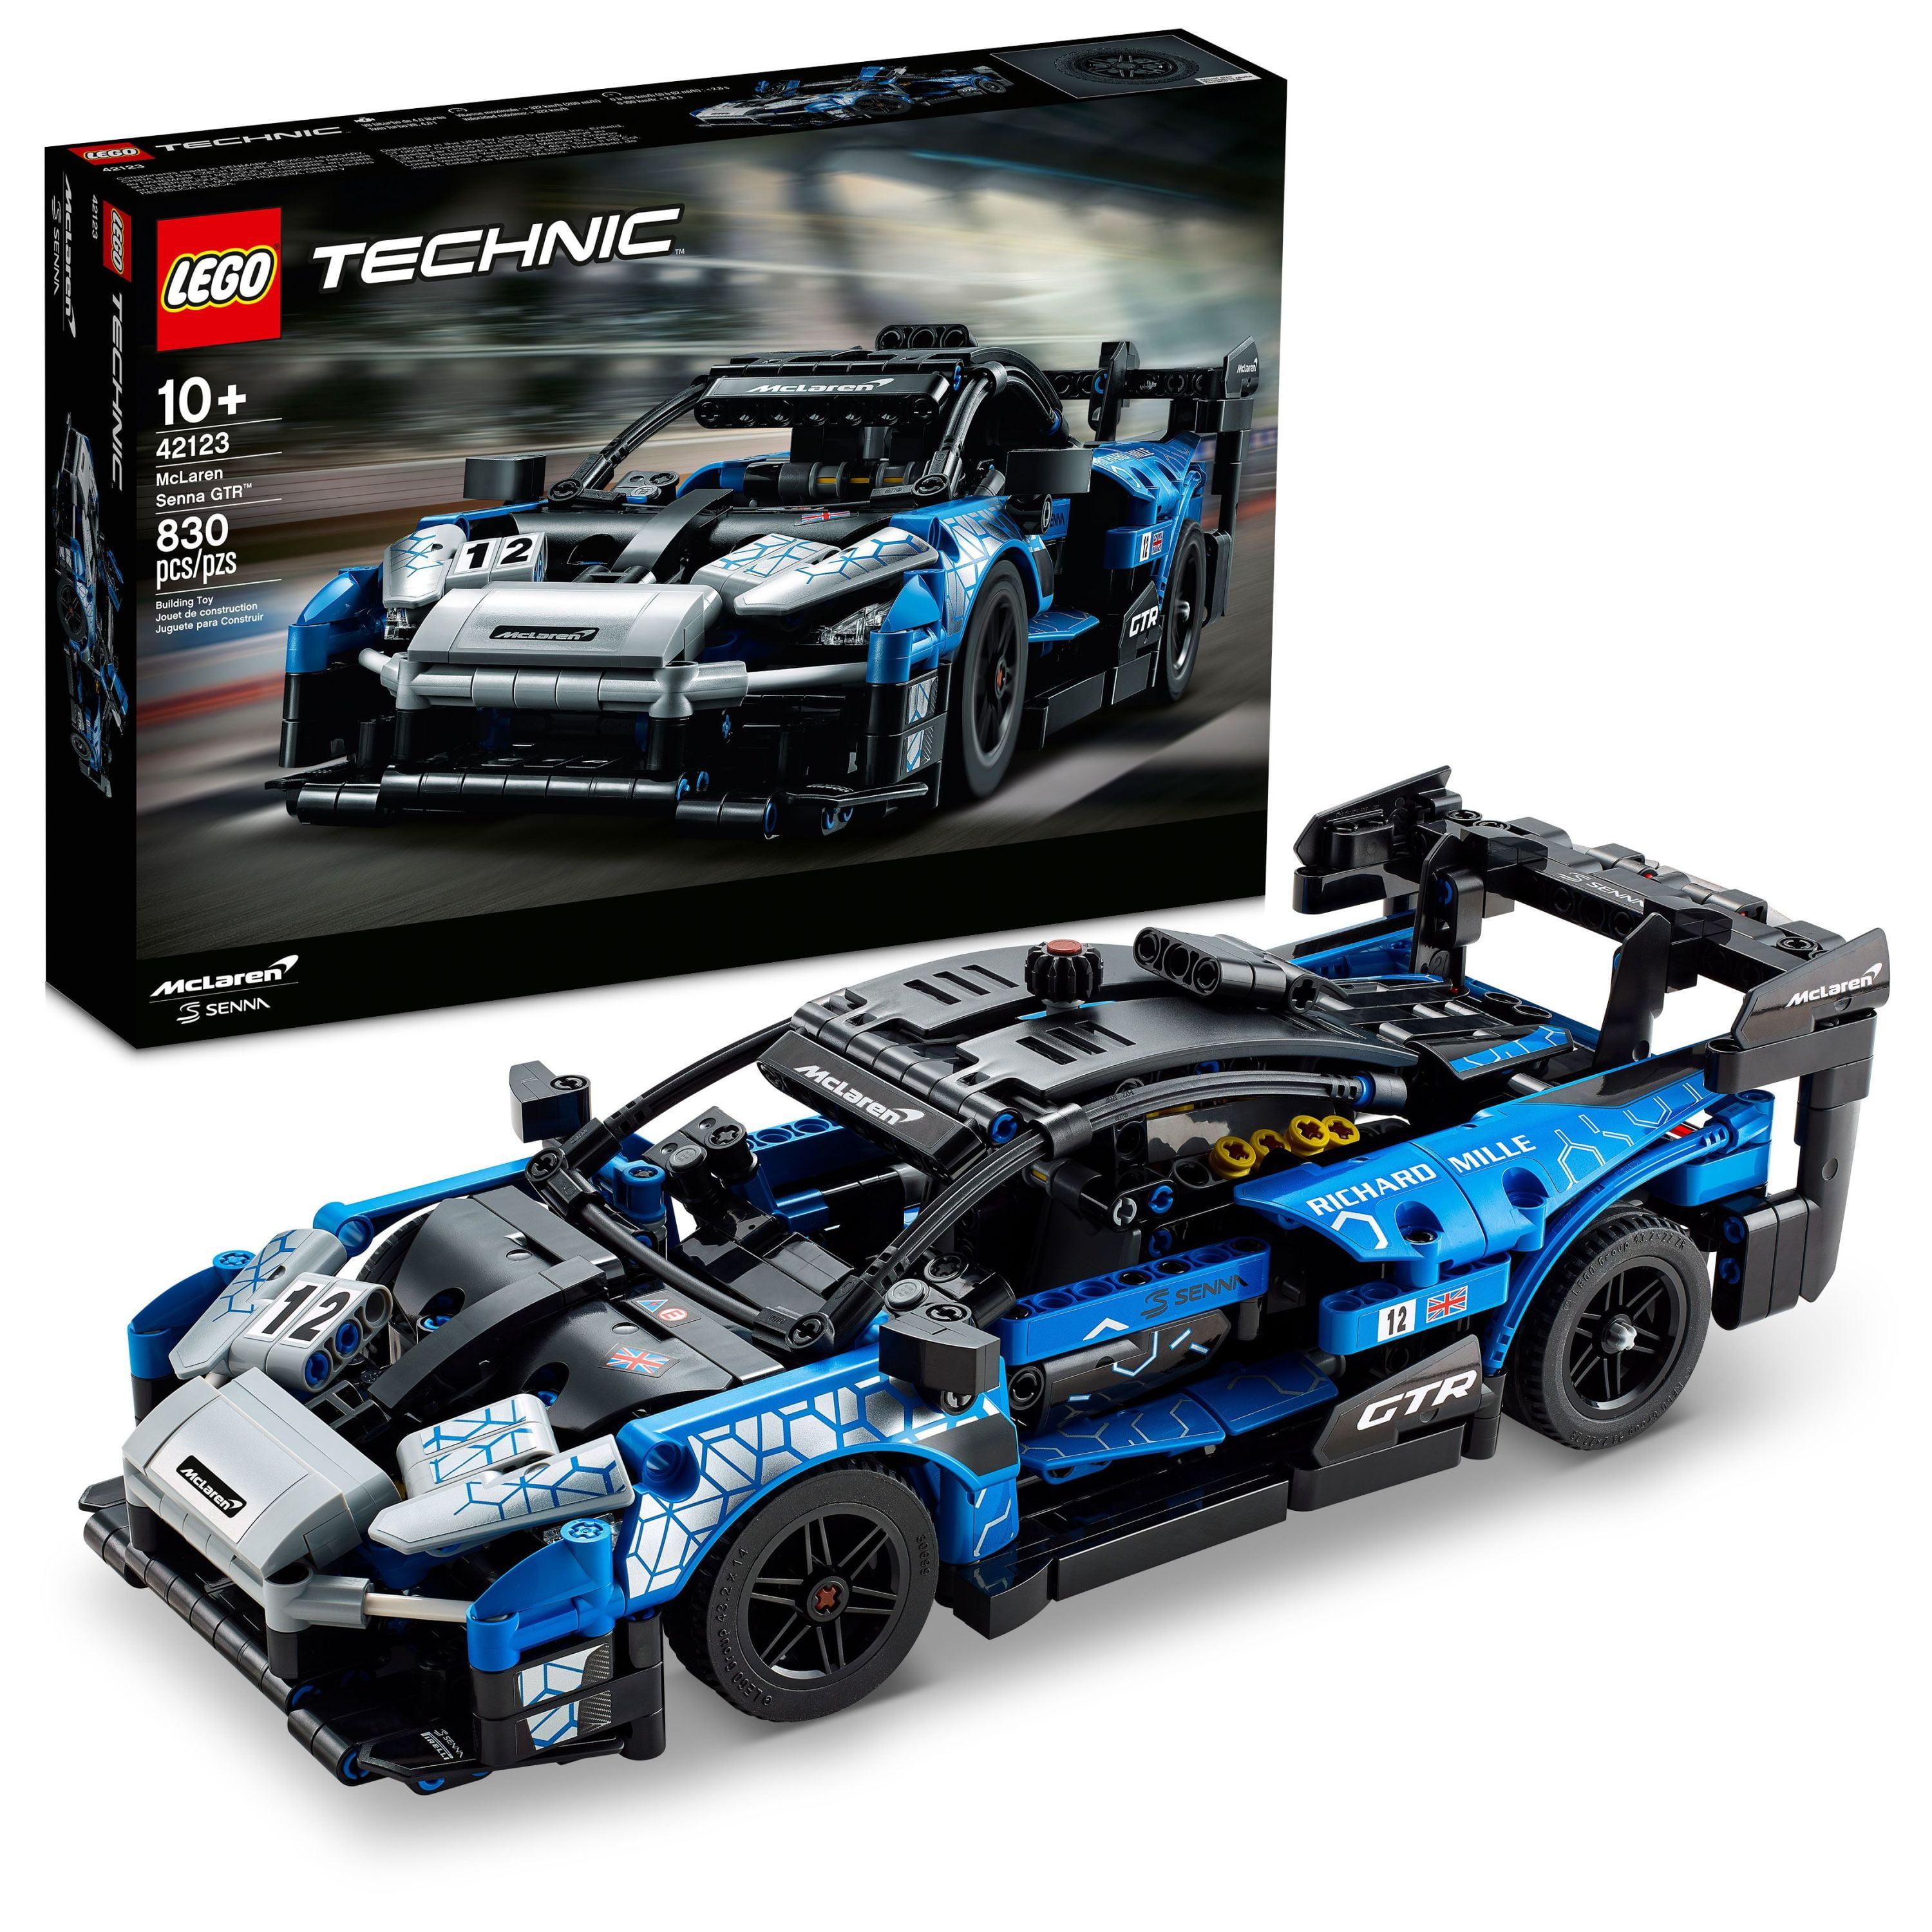 LEGO Technic McLaren Senna GTR 42123; Build and Display Model Building Toy (830 Pieces) picture pic